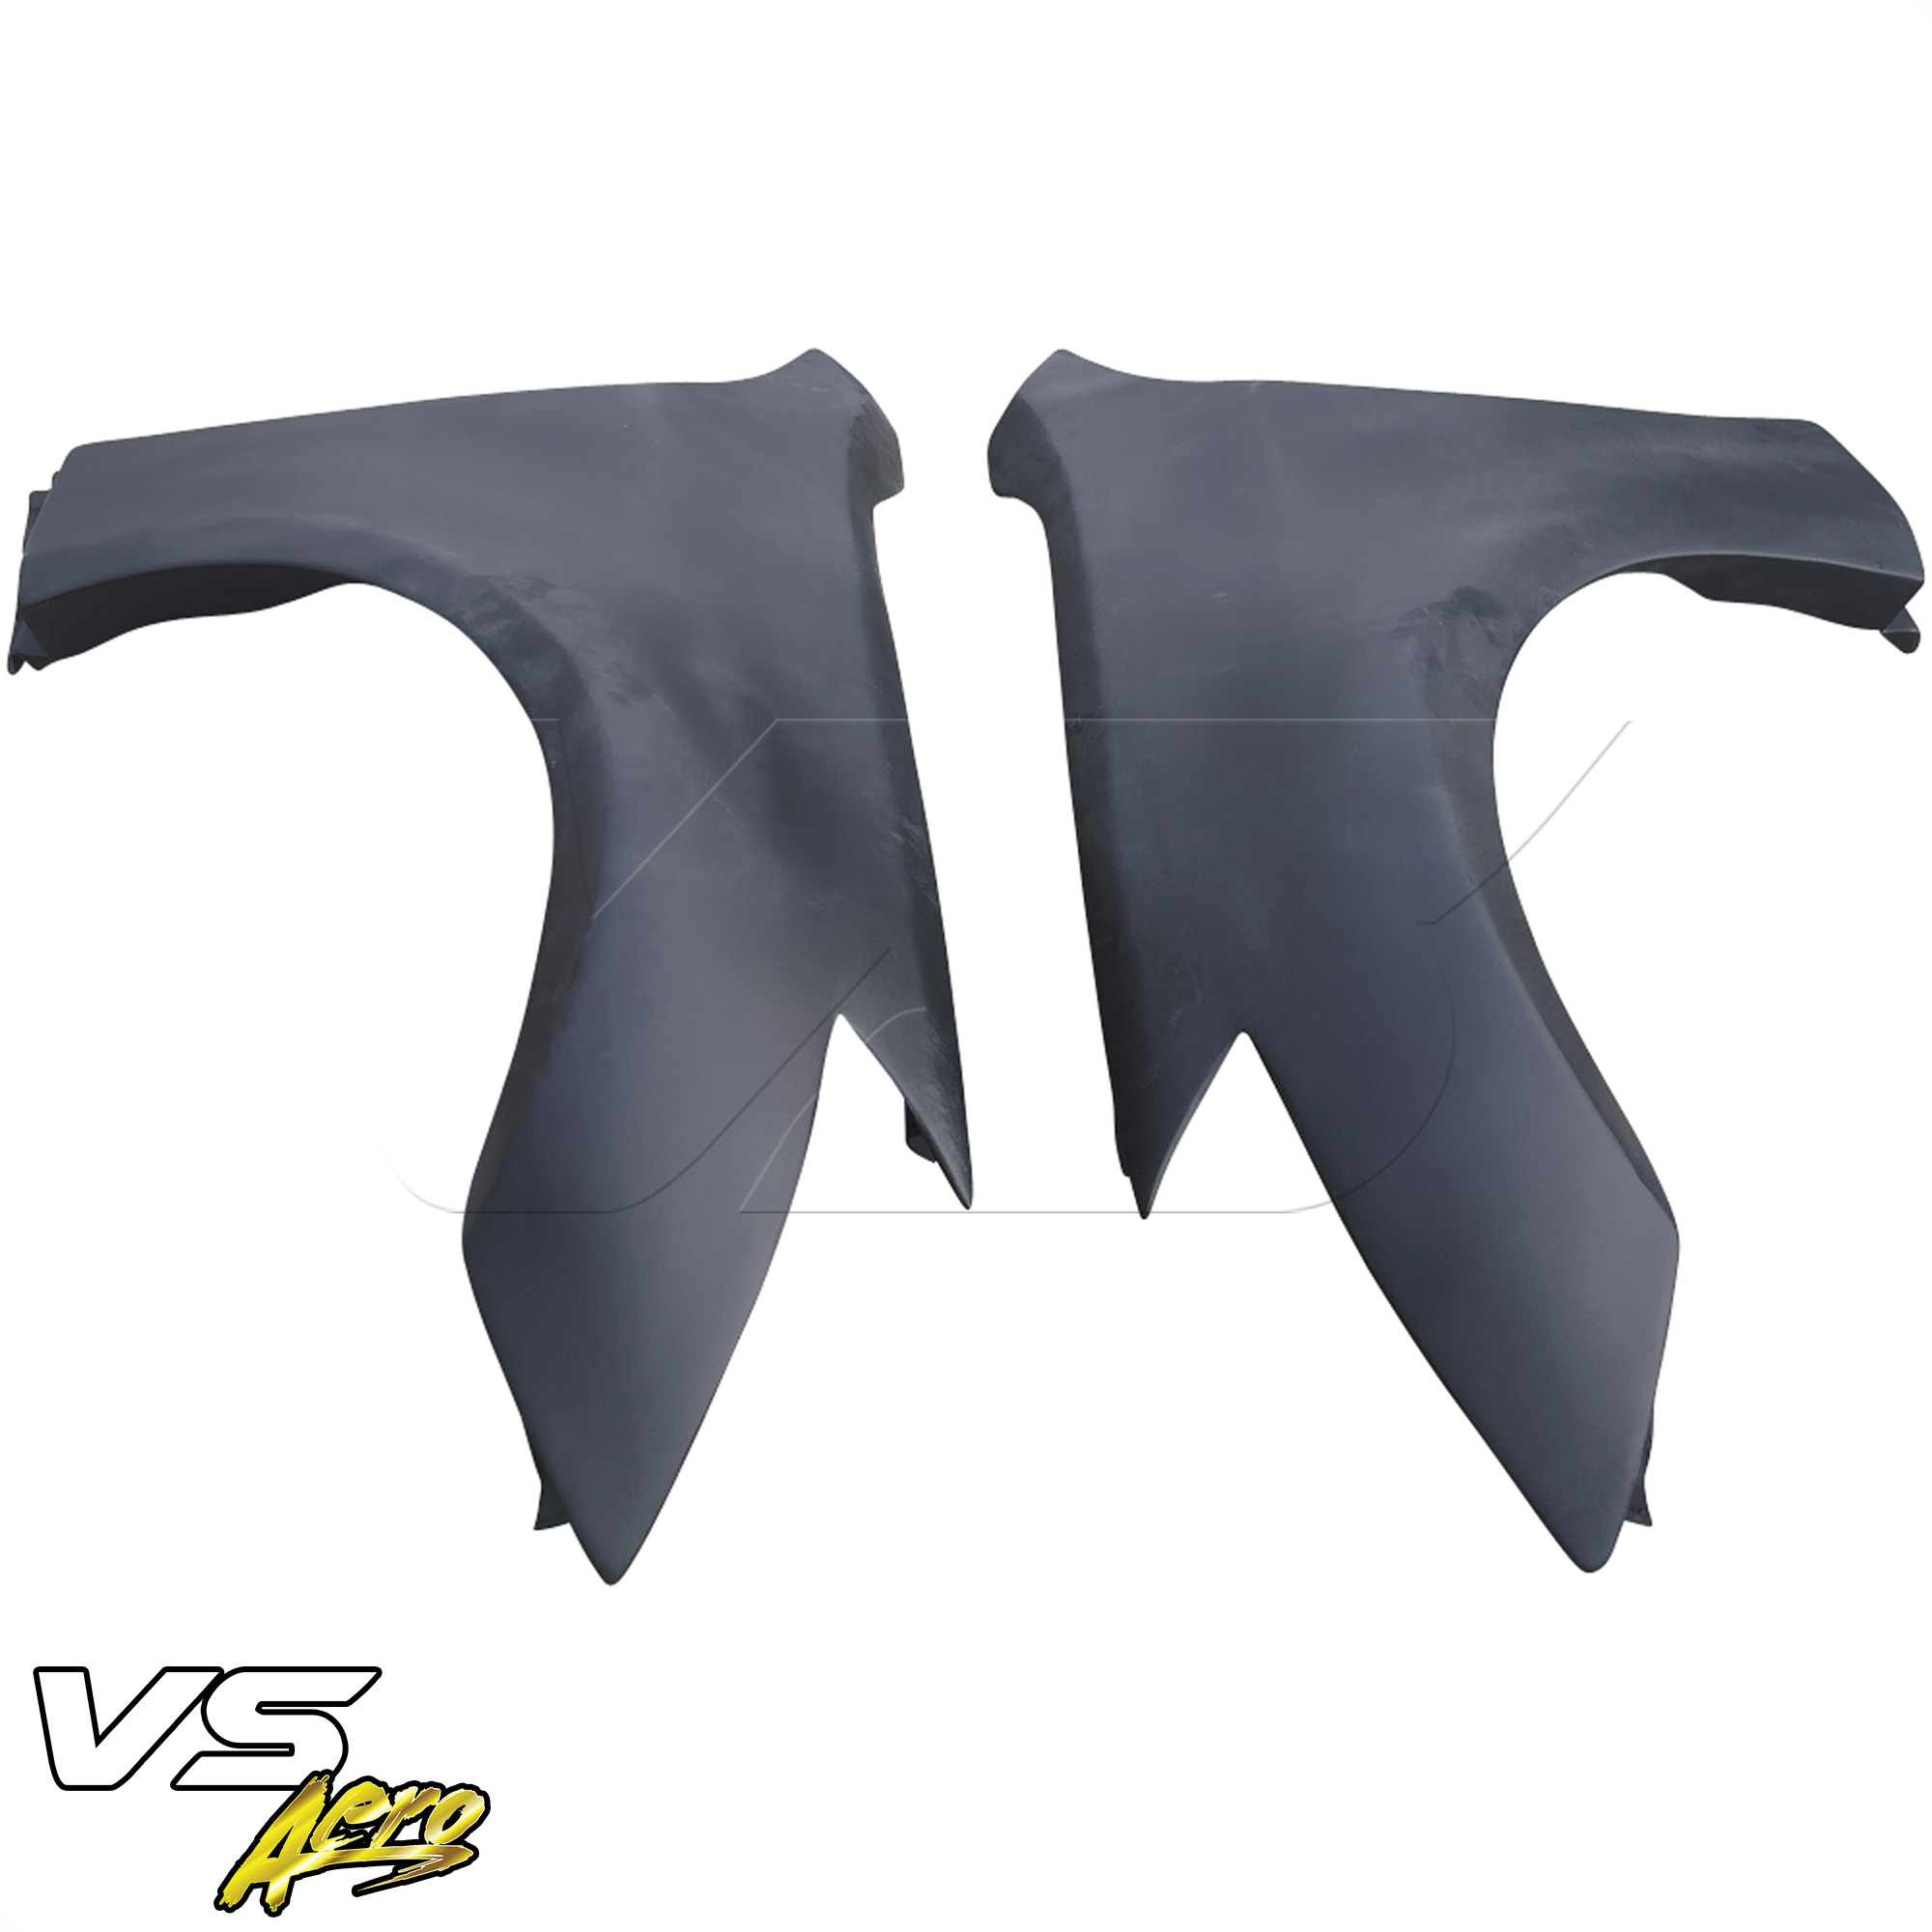 VSaero FRP APBR Wide Body Fenders (front) > Infiniti G35 Coupe 2003-2006 > 2dr Coupe - Image 2